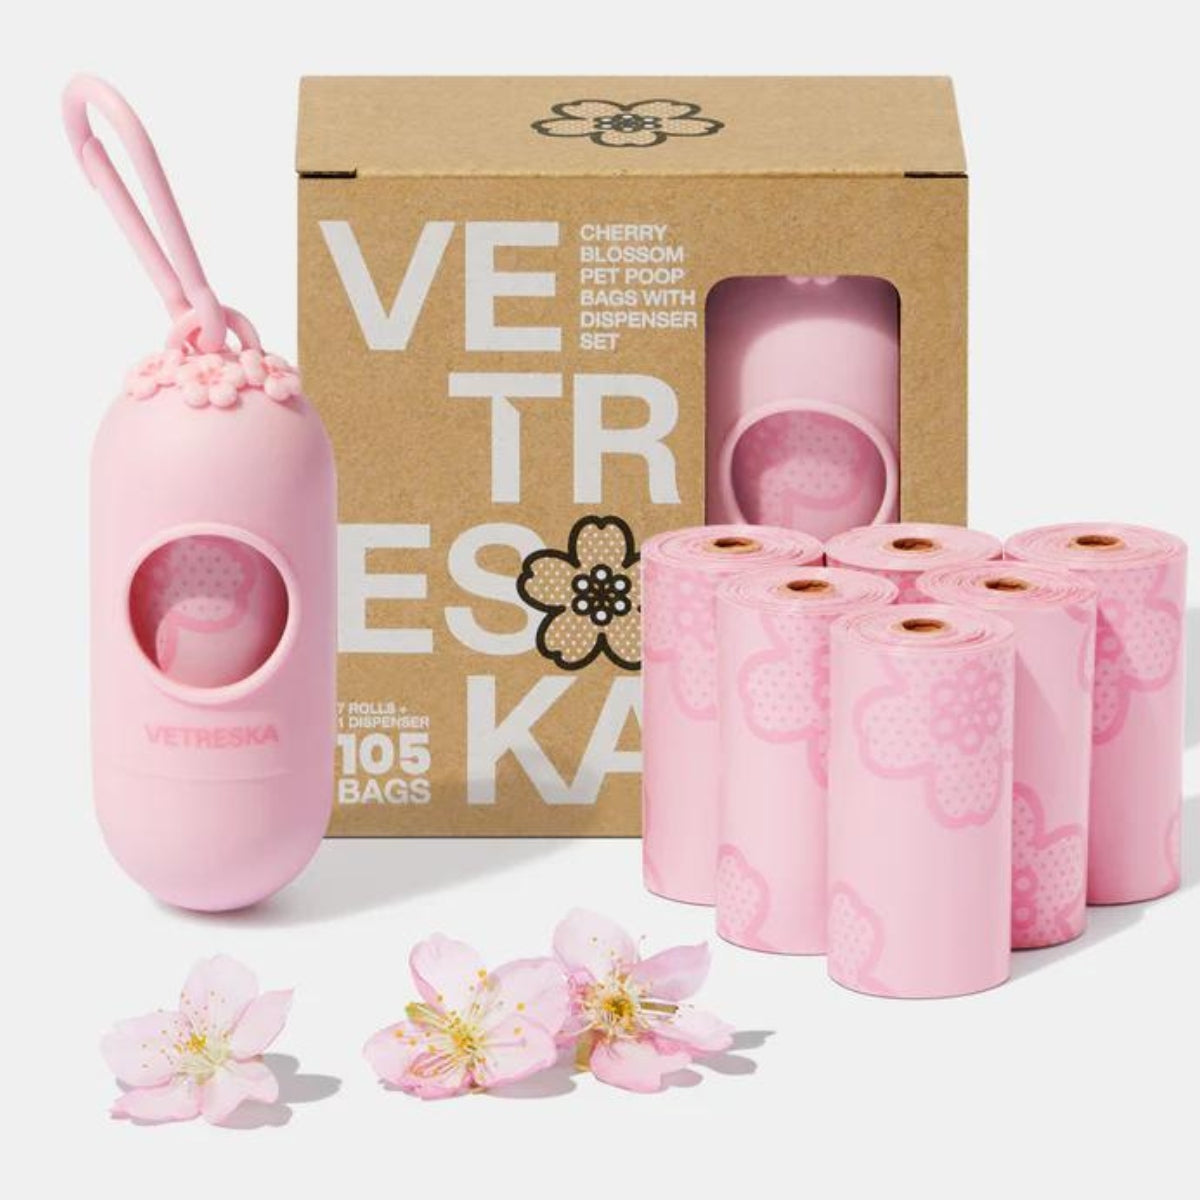 Vetreska Scented Poop Bag Dispensers and Bags| Flora & Cherry Blossom & Strawberry